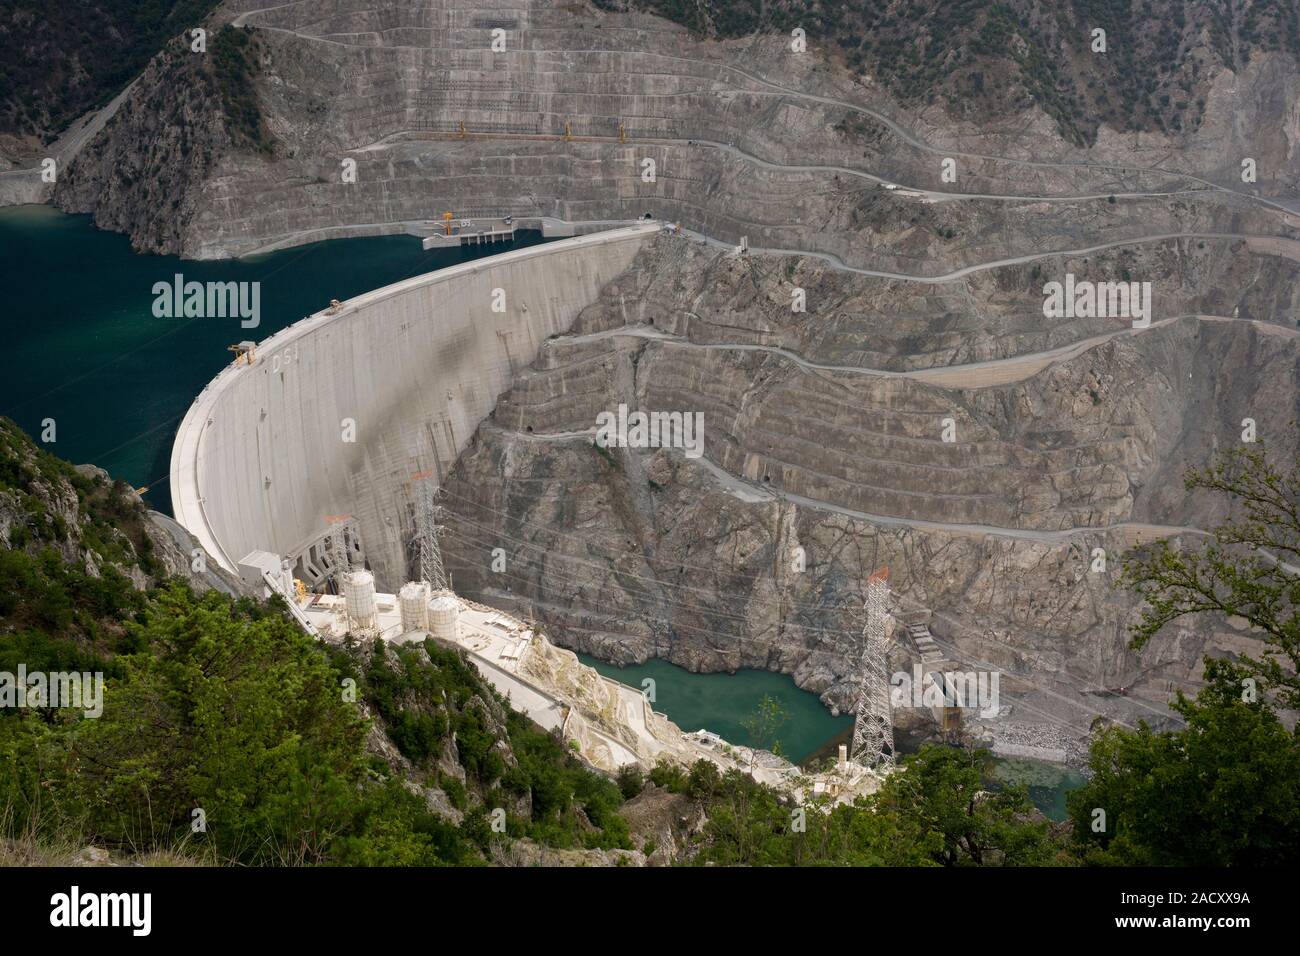 Coruh River dam construction, Turkey. View of a dam being built across the Coruh River valley (Coruh Nehri), Mescit Mountains, Turkey. A total of 15 l Stock Photo